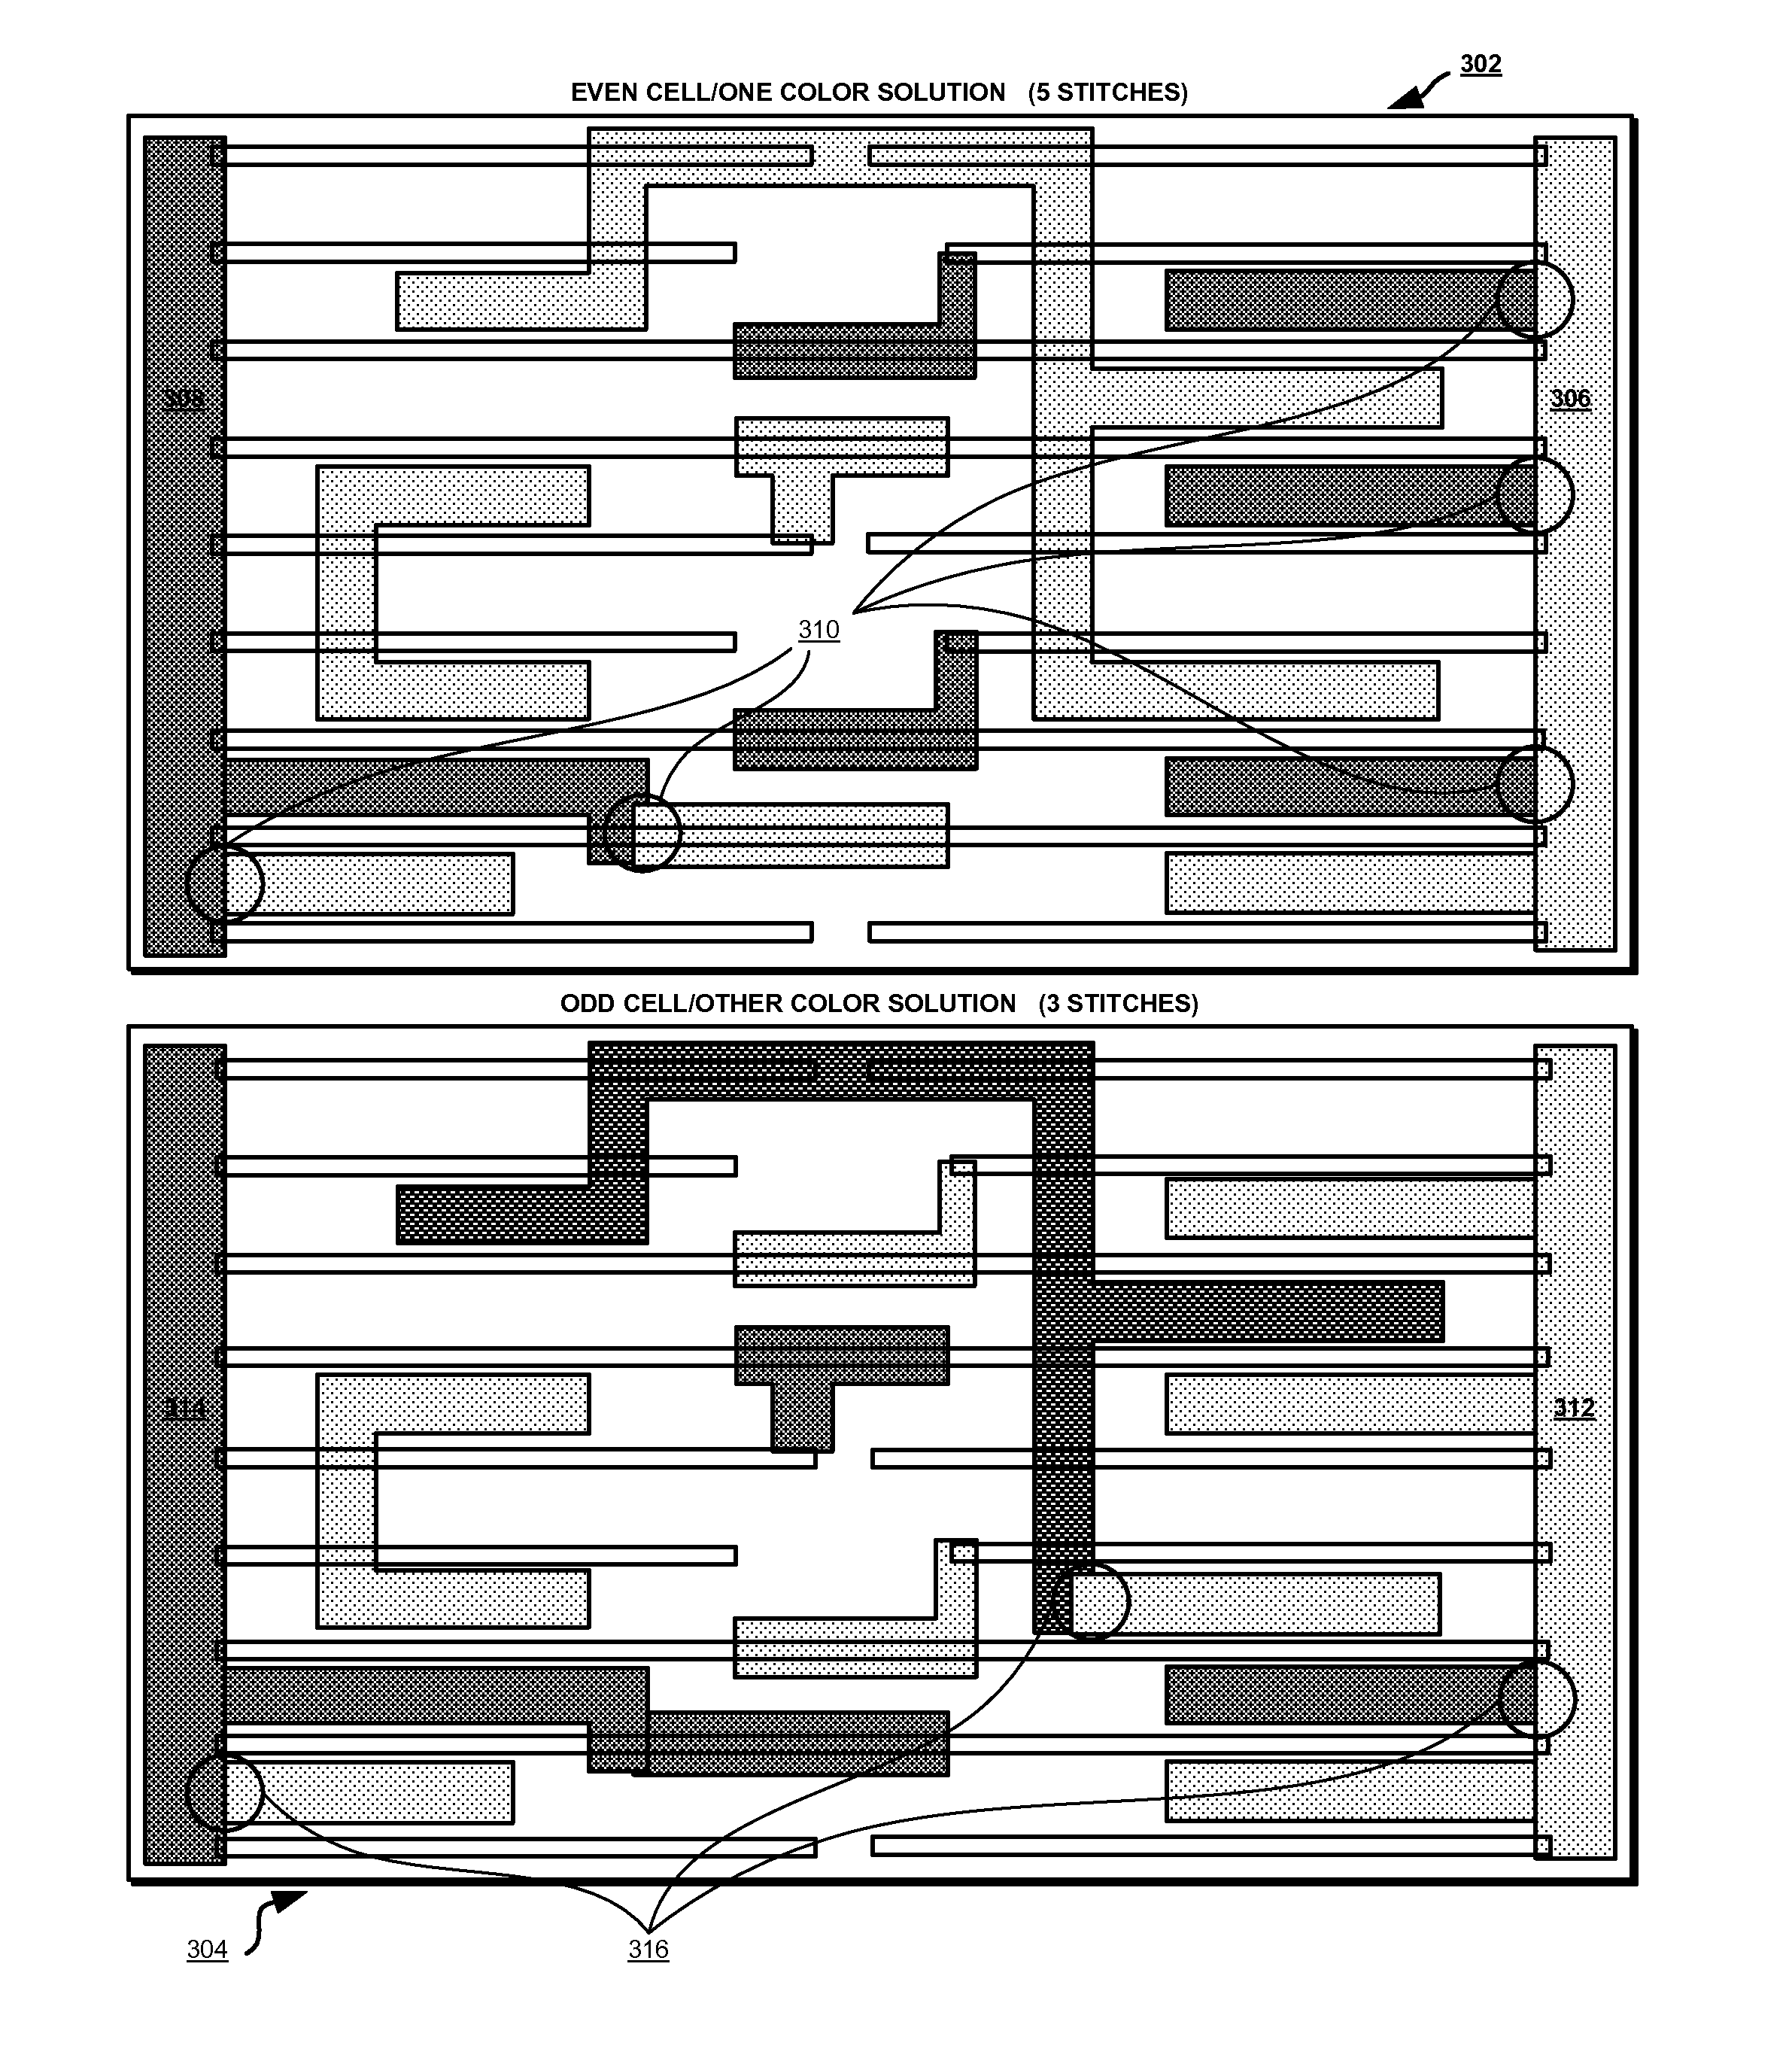 Multi-patterning lithography aware cell placement in integrated circuit design